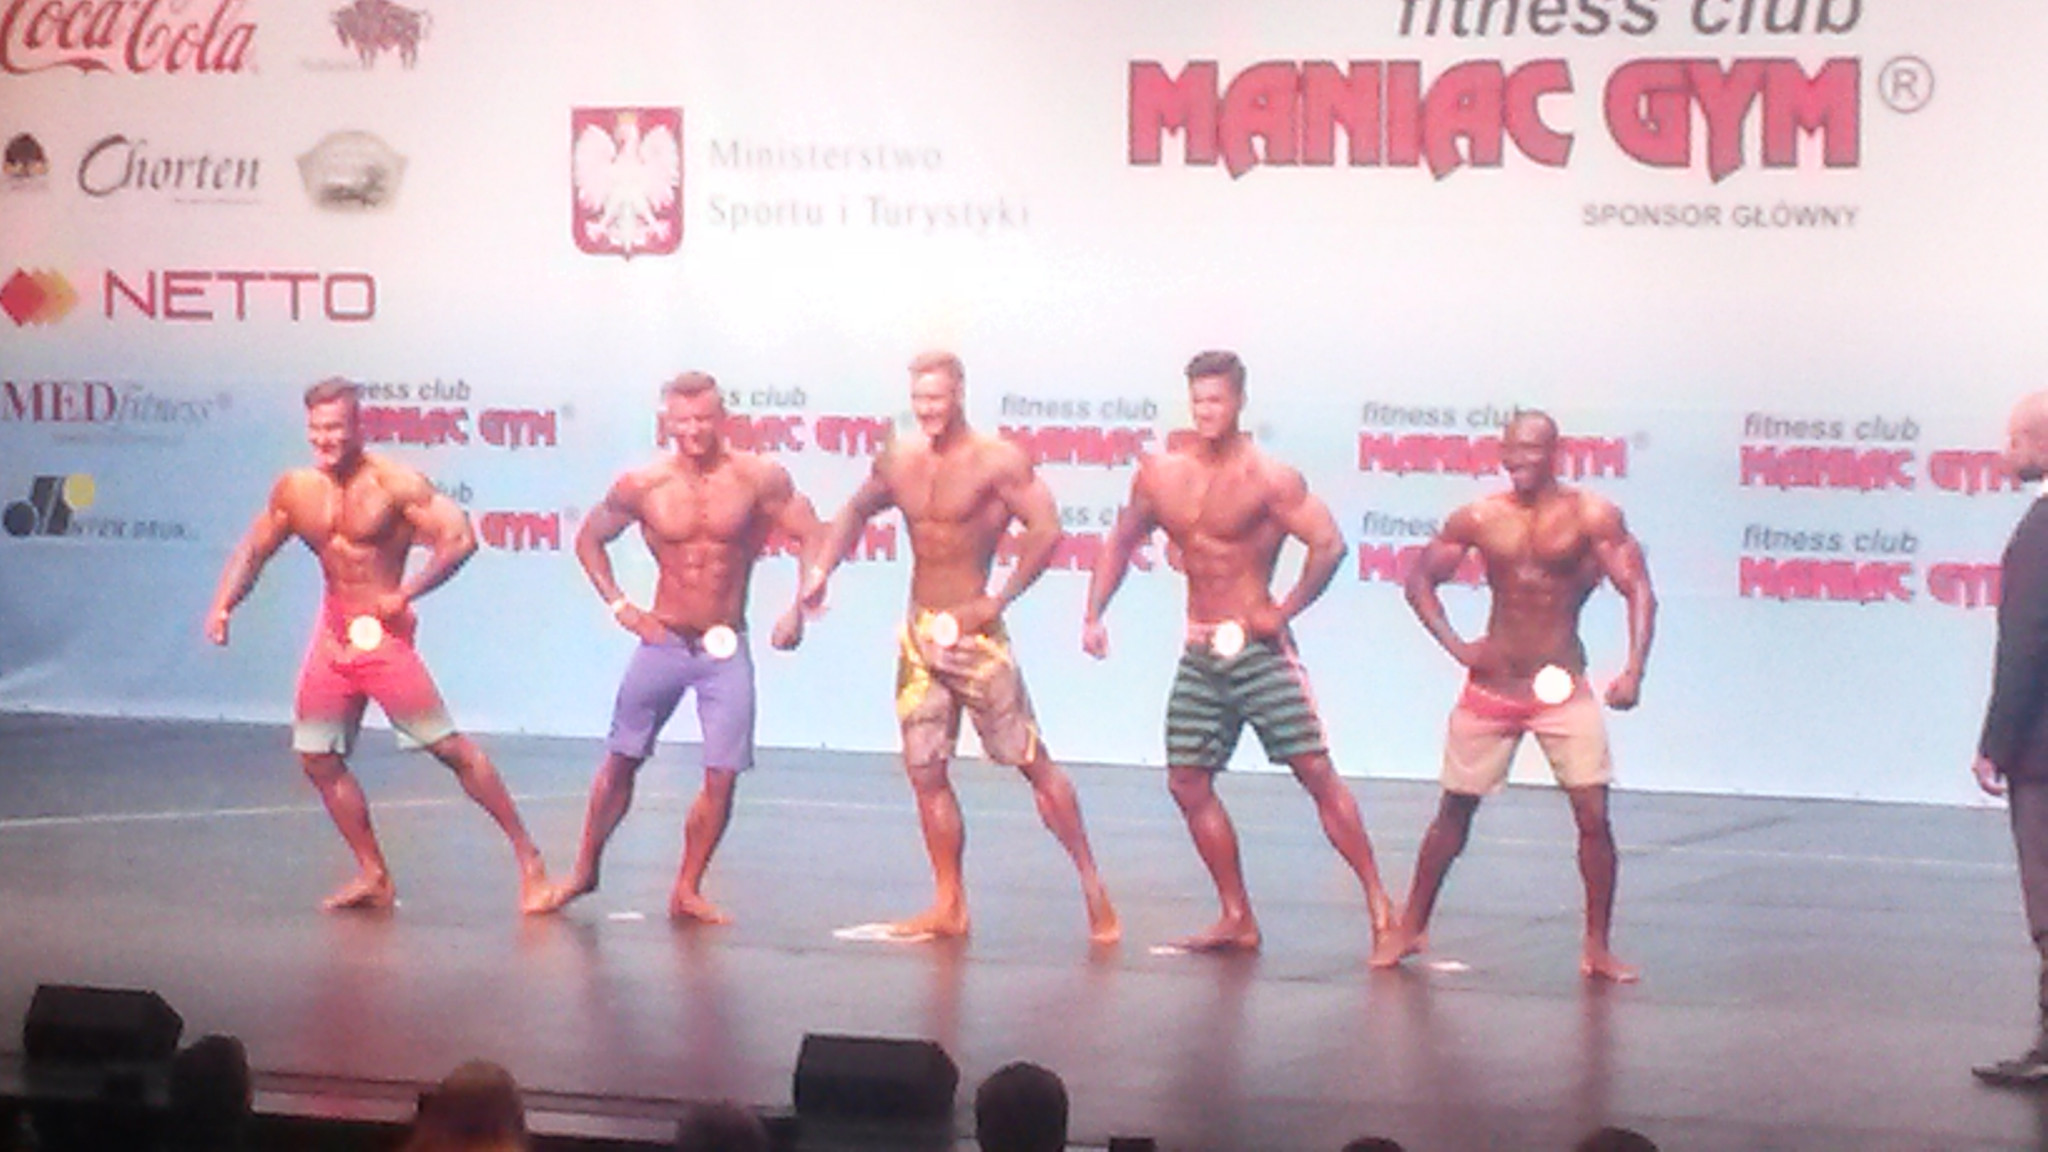 The Championships concluded with the Elite Pro Men's Physique competition with prize money to be won ©ITG